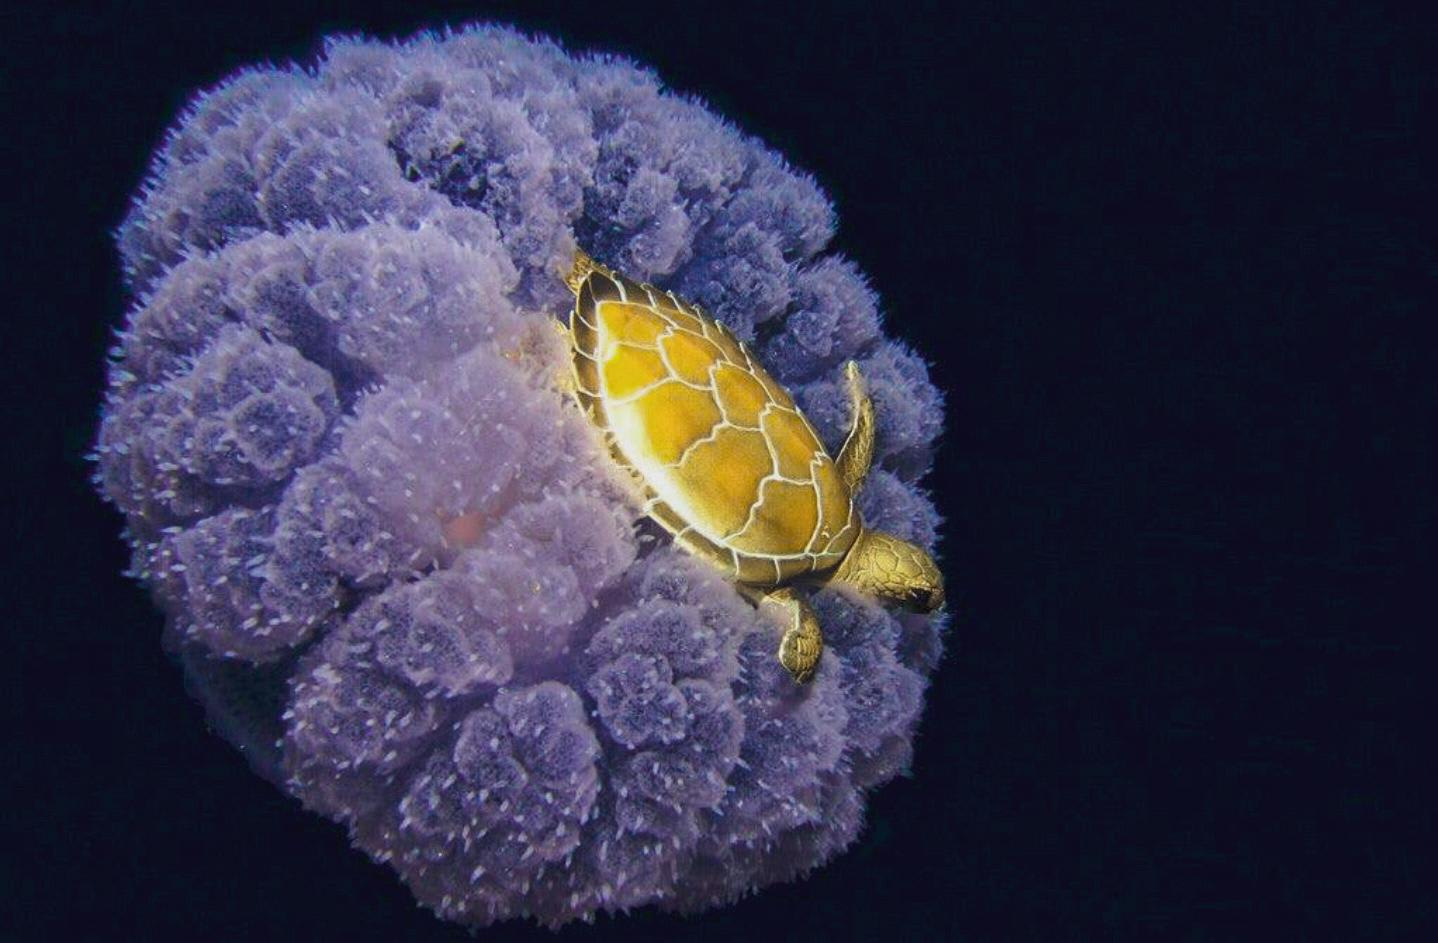 PsBattle: a baby turtle on top of a jellyfish